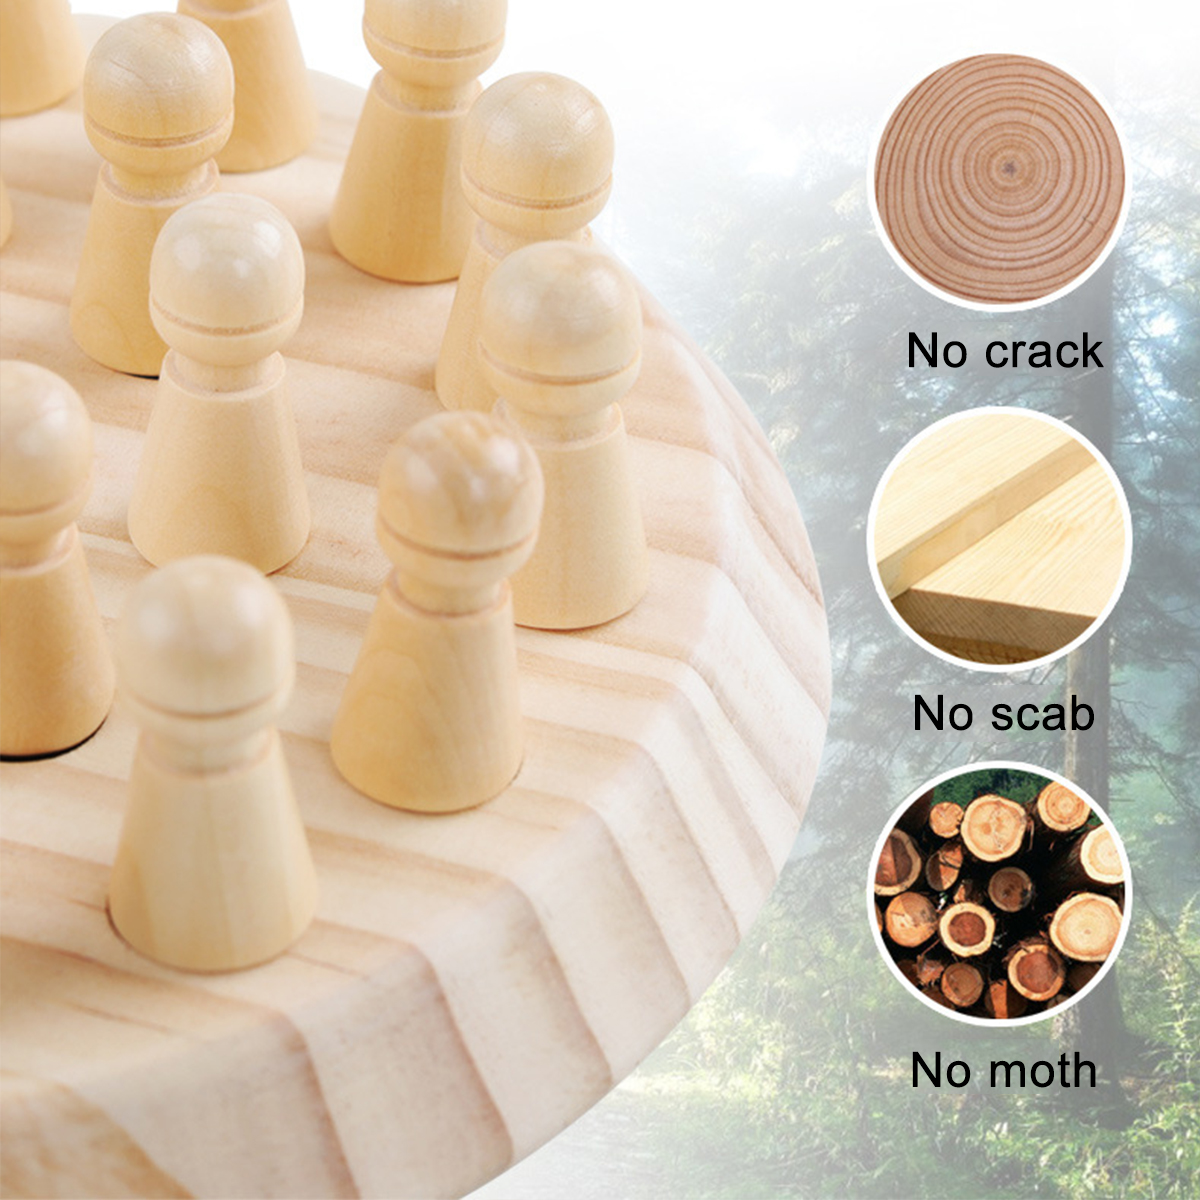 Montessori-Wooden-Colorful-Memory-Chess-Game-Clip-Beads-3D-Puzzle-Learning-Educational-Toys-for-Chil-1723192-4